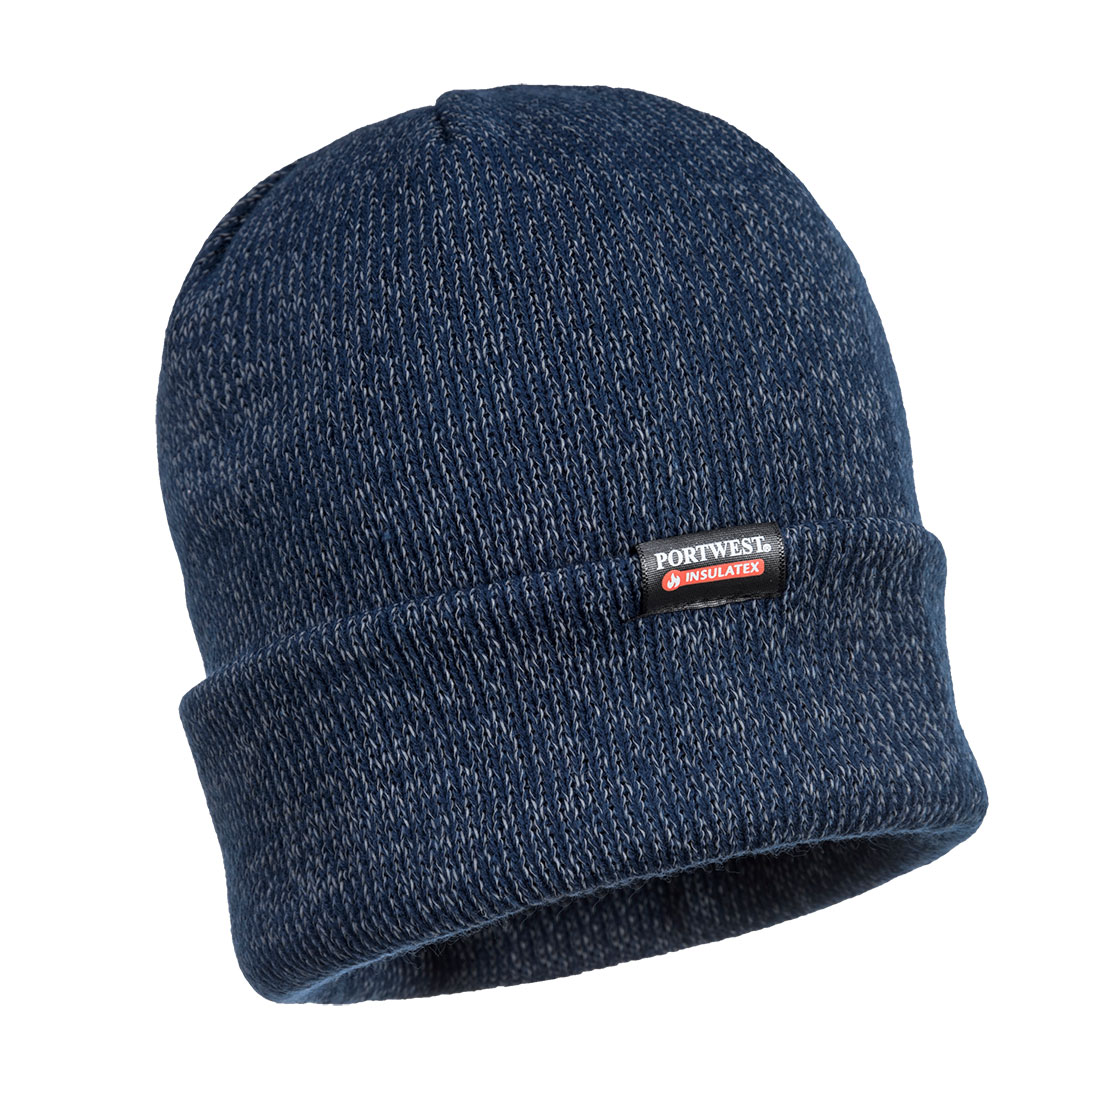 Reflective Knit Hat, Insulatex Lined Size  Navy